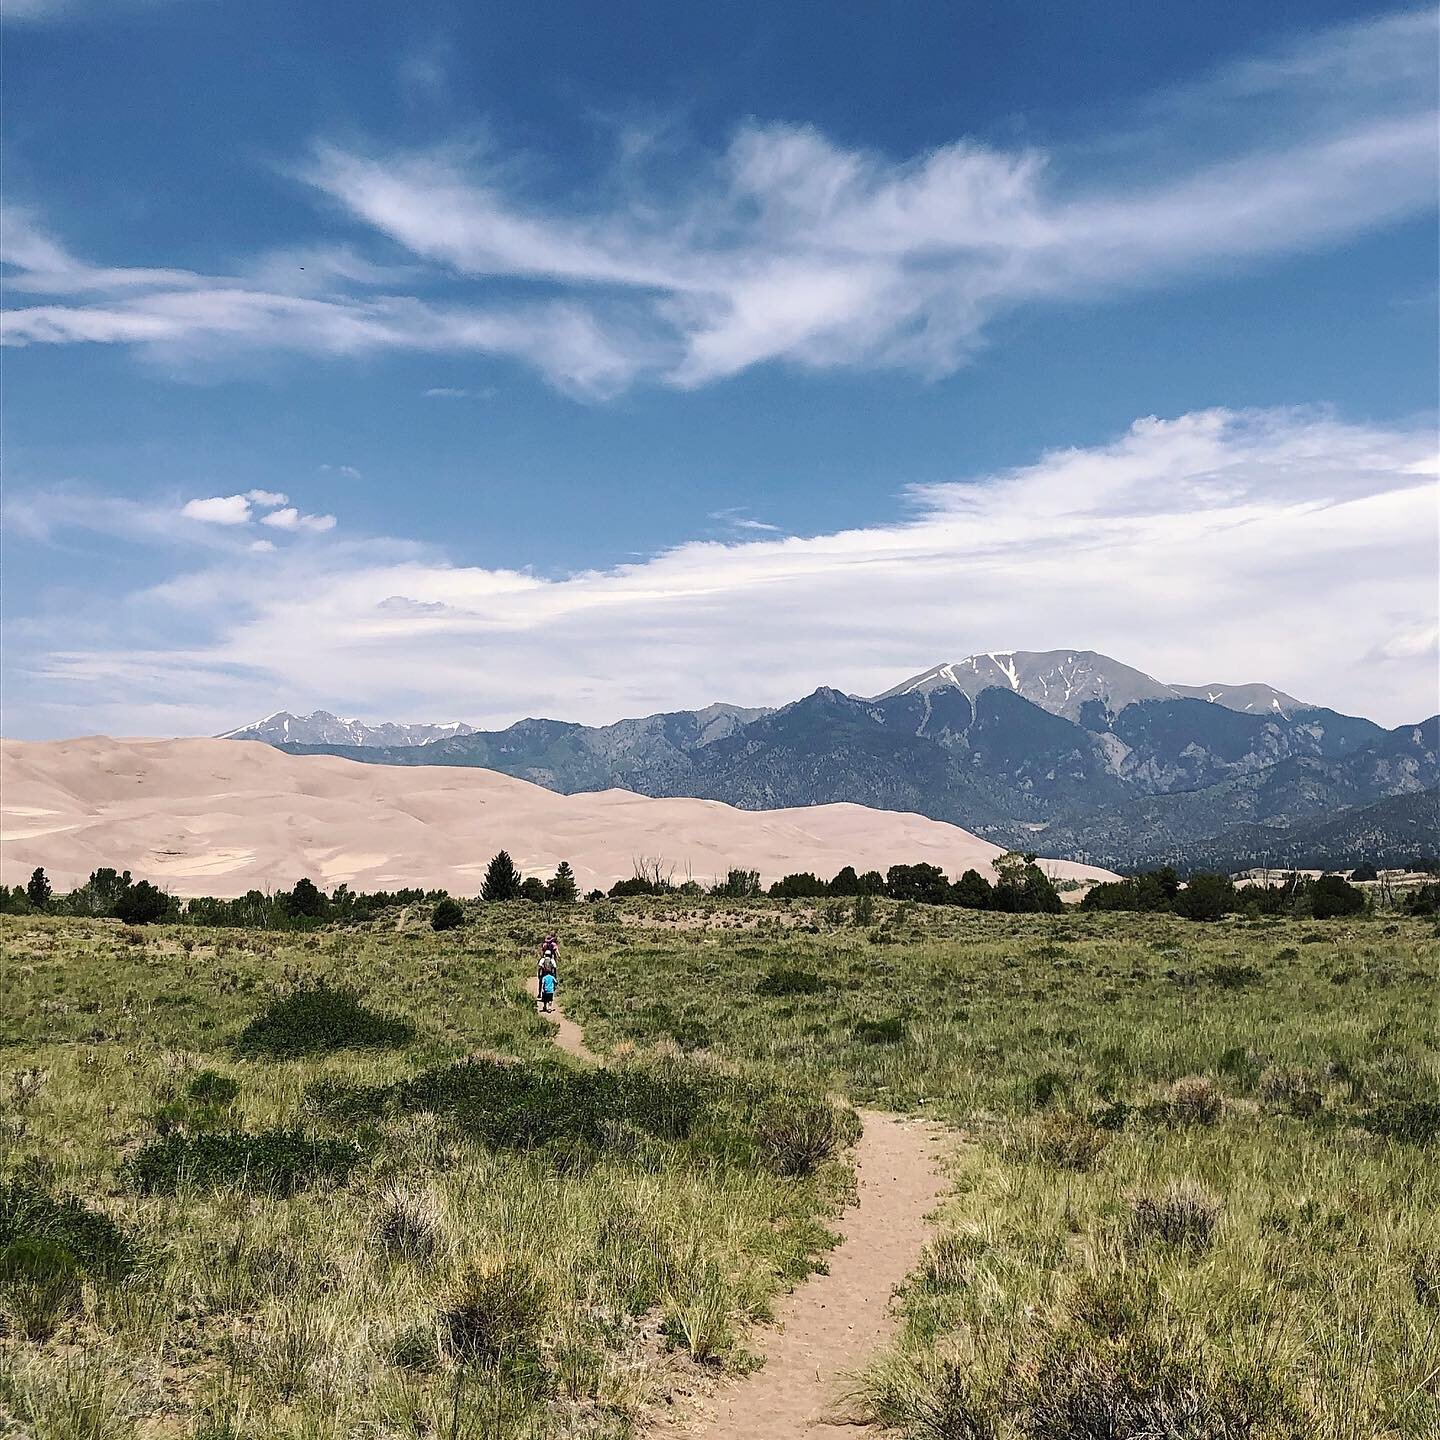 Is #wanderlustwednesday a thing? 🤔 Let&rsquo;s go with yes, just bc it gives me an excuse to talk about this summer&rsquo;s utterly awesome Colorado roadtrip - gorgeous scenery, great food, and even better company 🙌 Wrote about it for @budgettravel